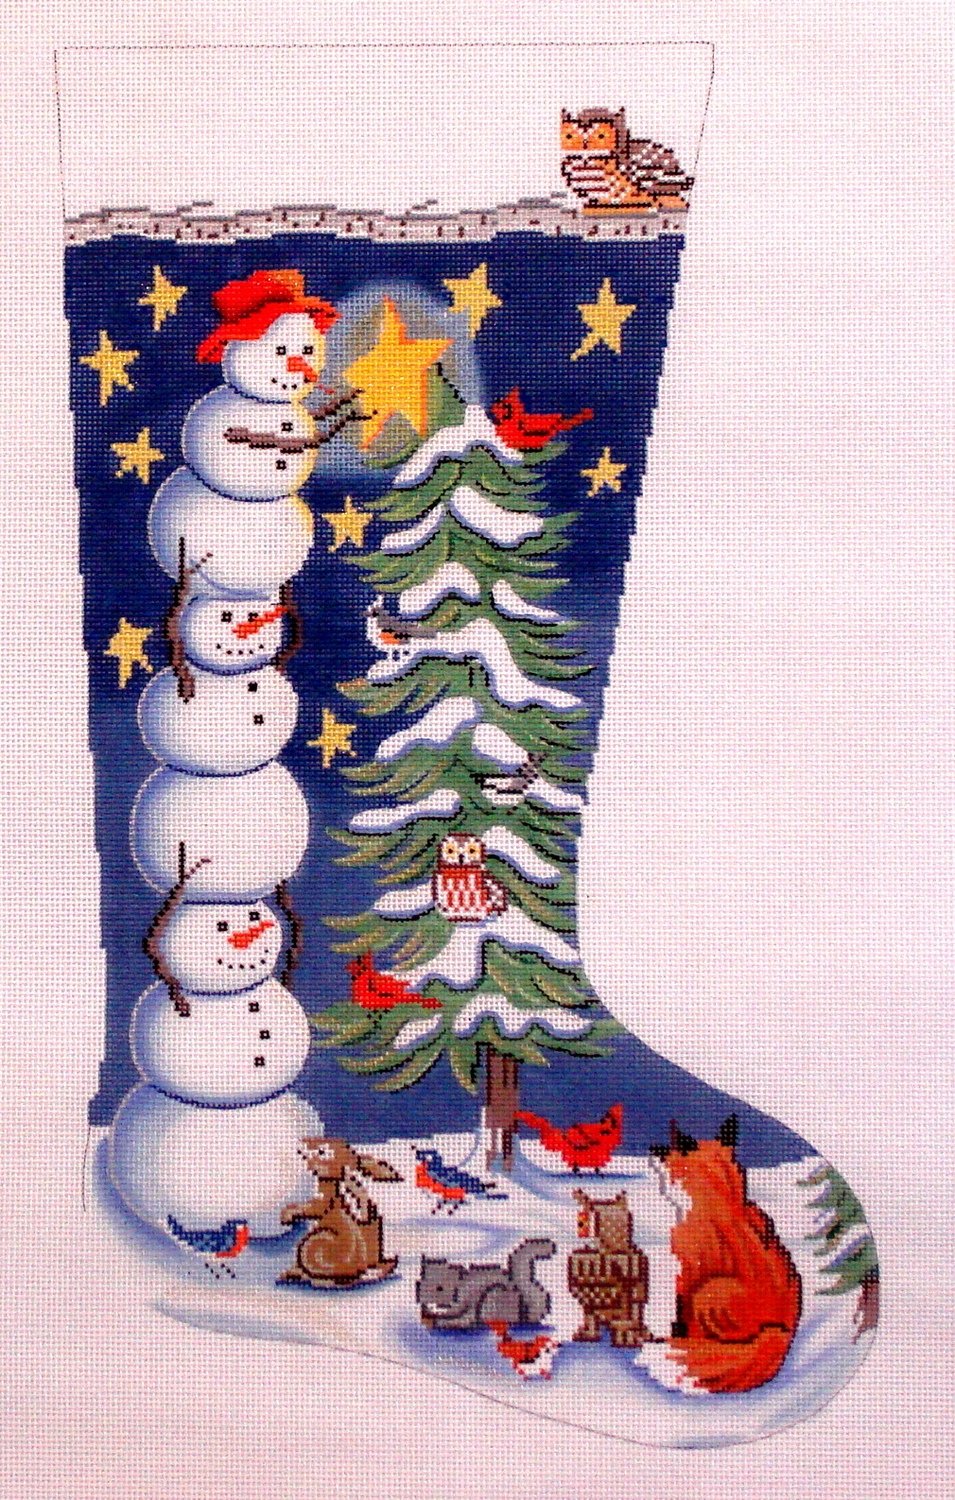 Tree Trimming Snowmen Stocking   (Handpainted by Alice Peterson)